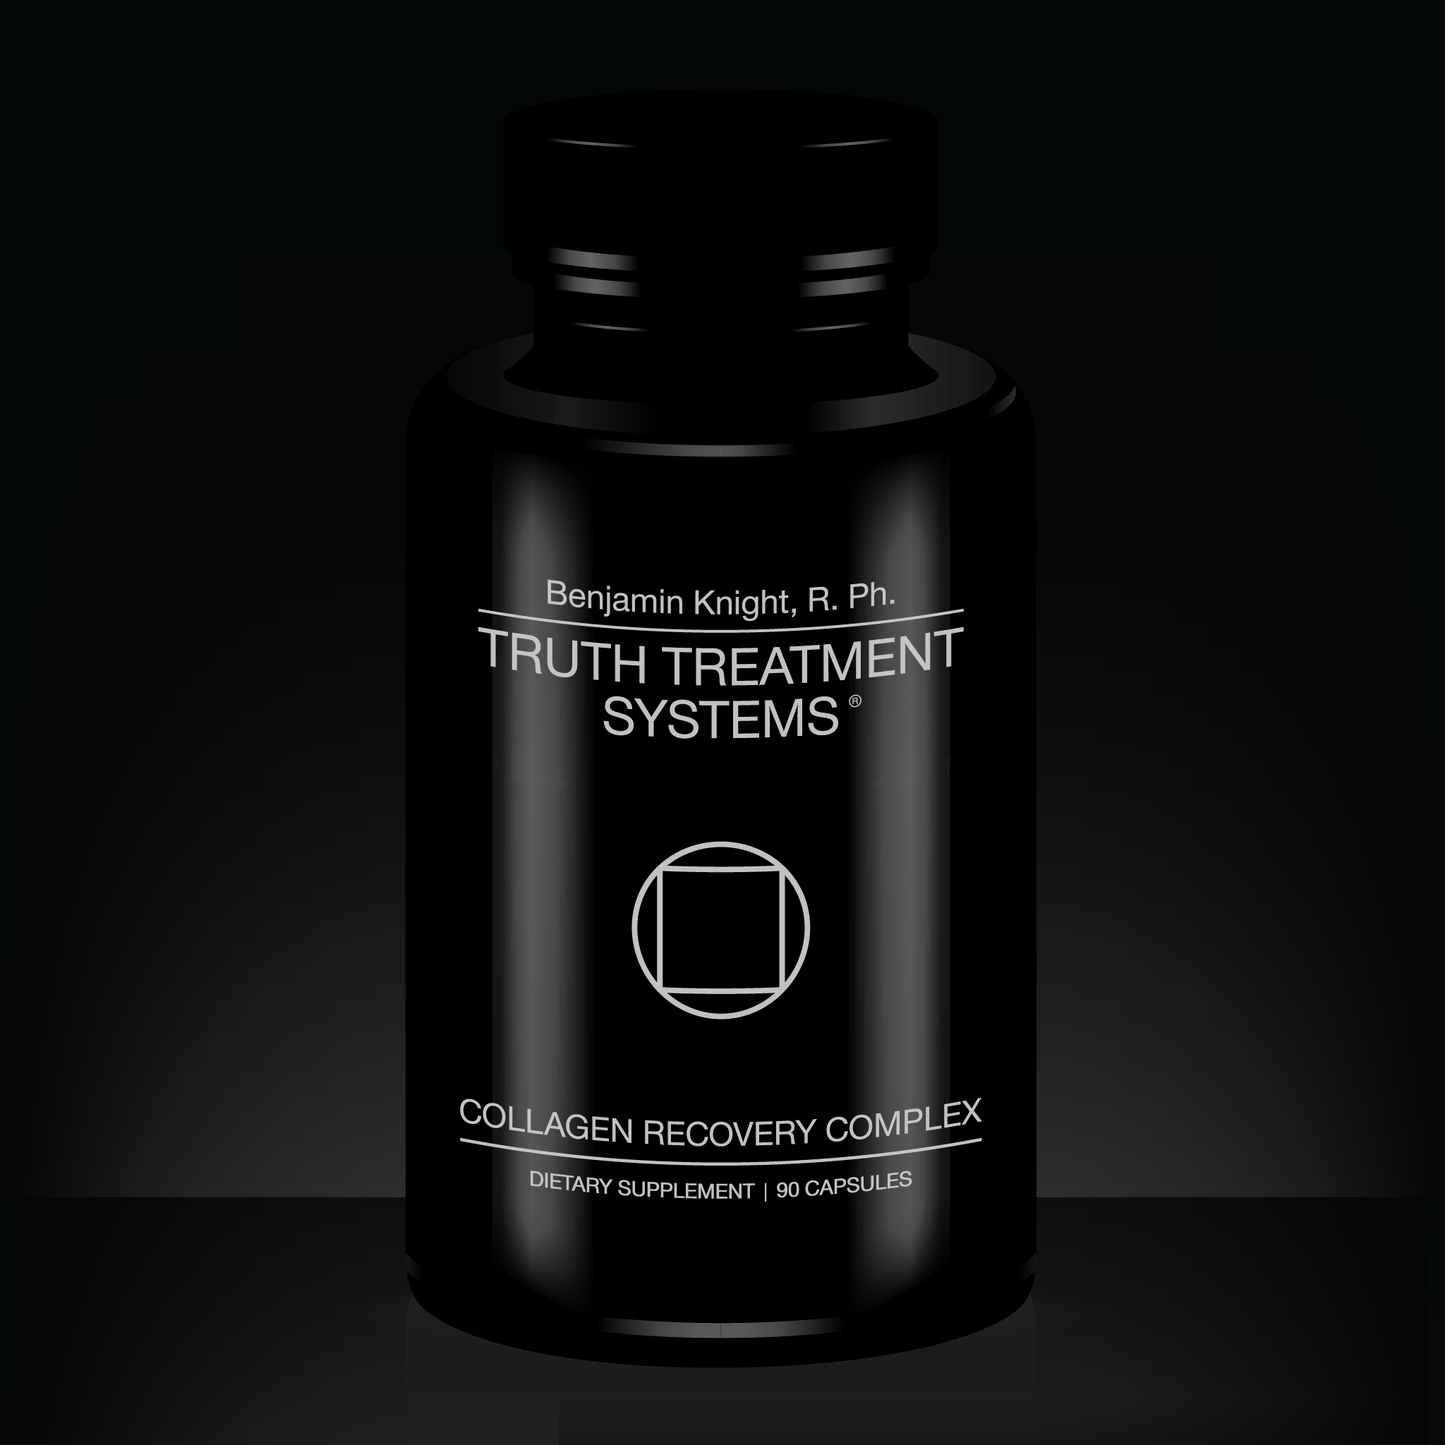 Collagen Recovery Complex